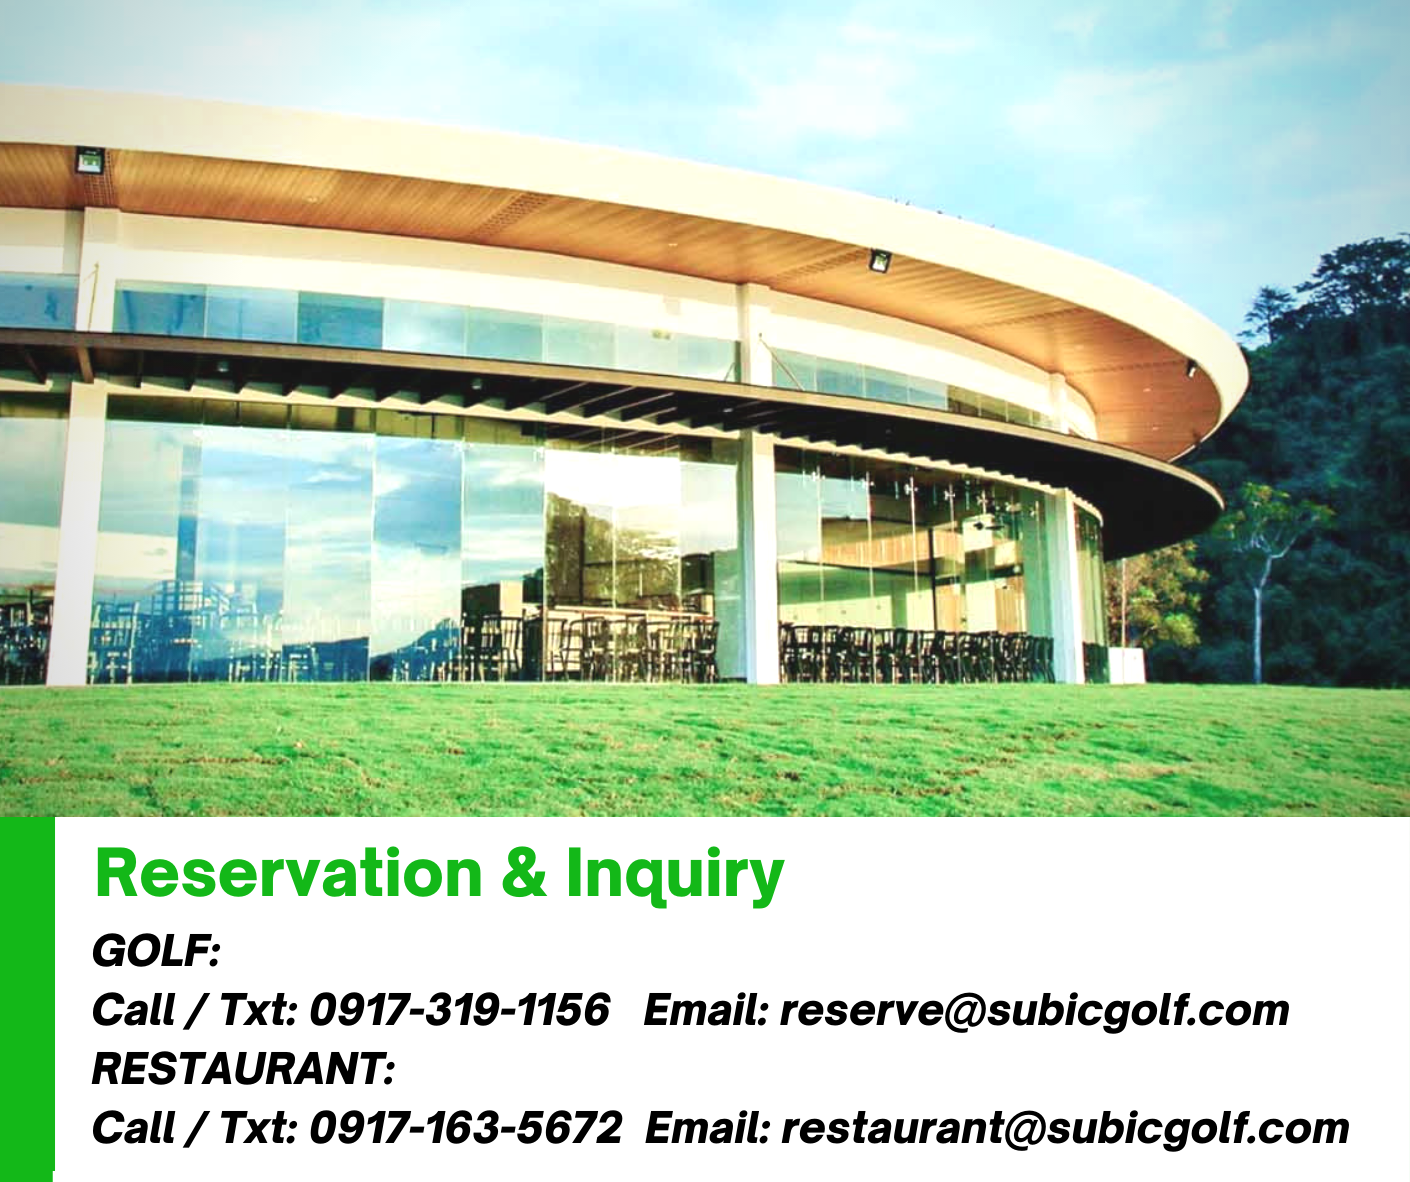 Reservation and Inquiry Lines